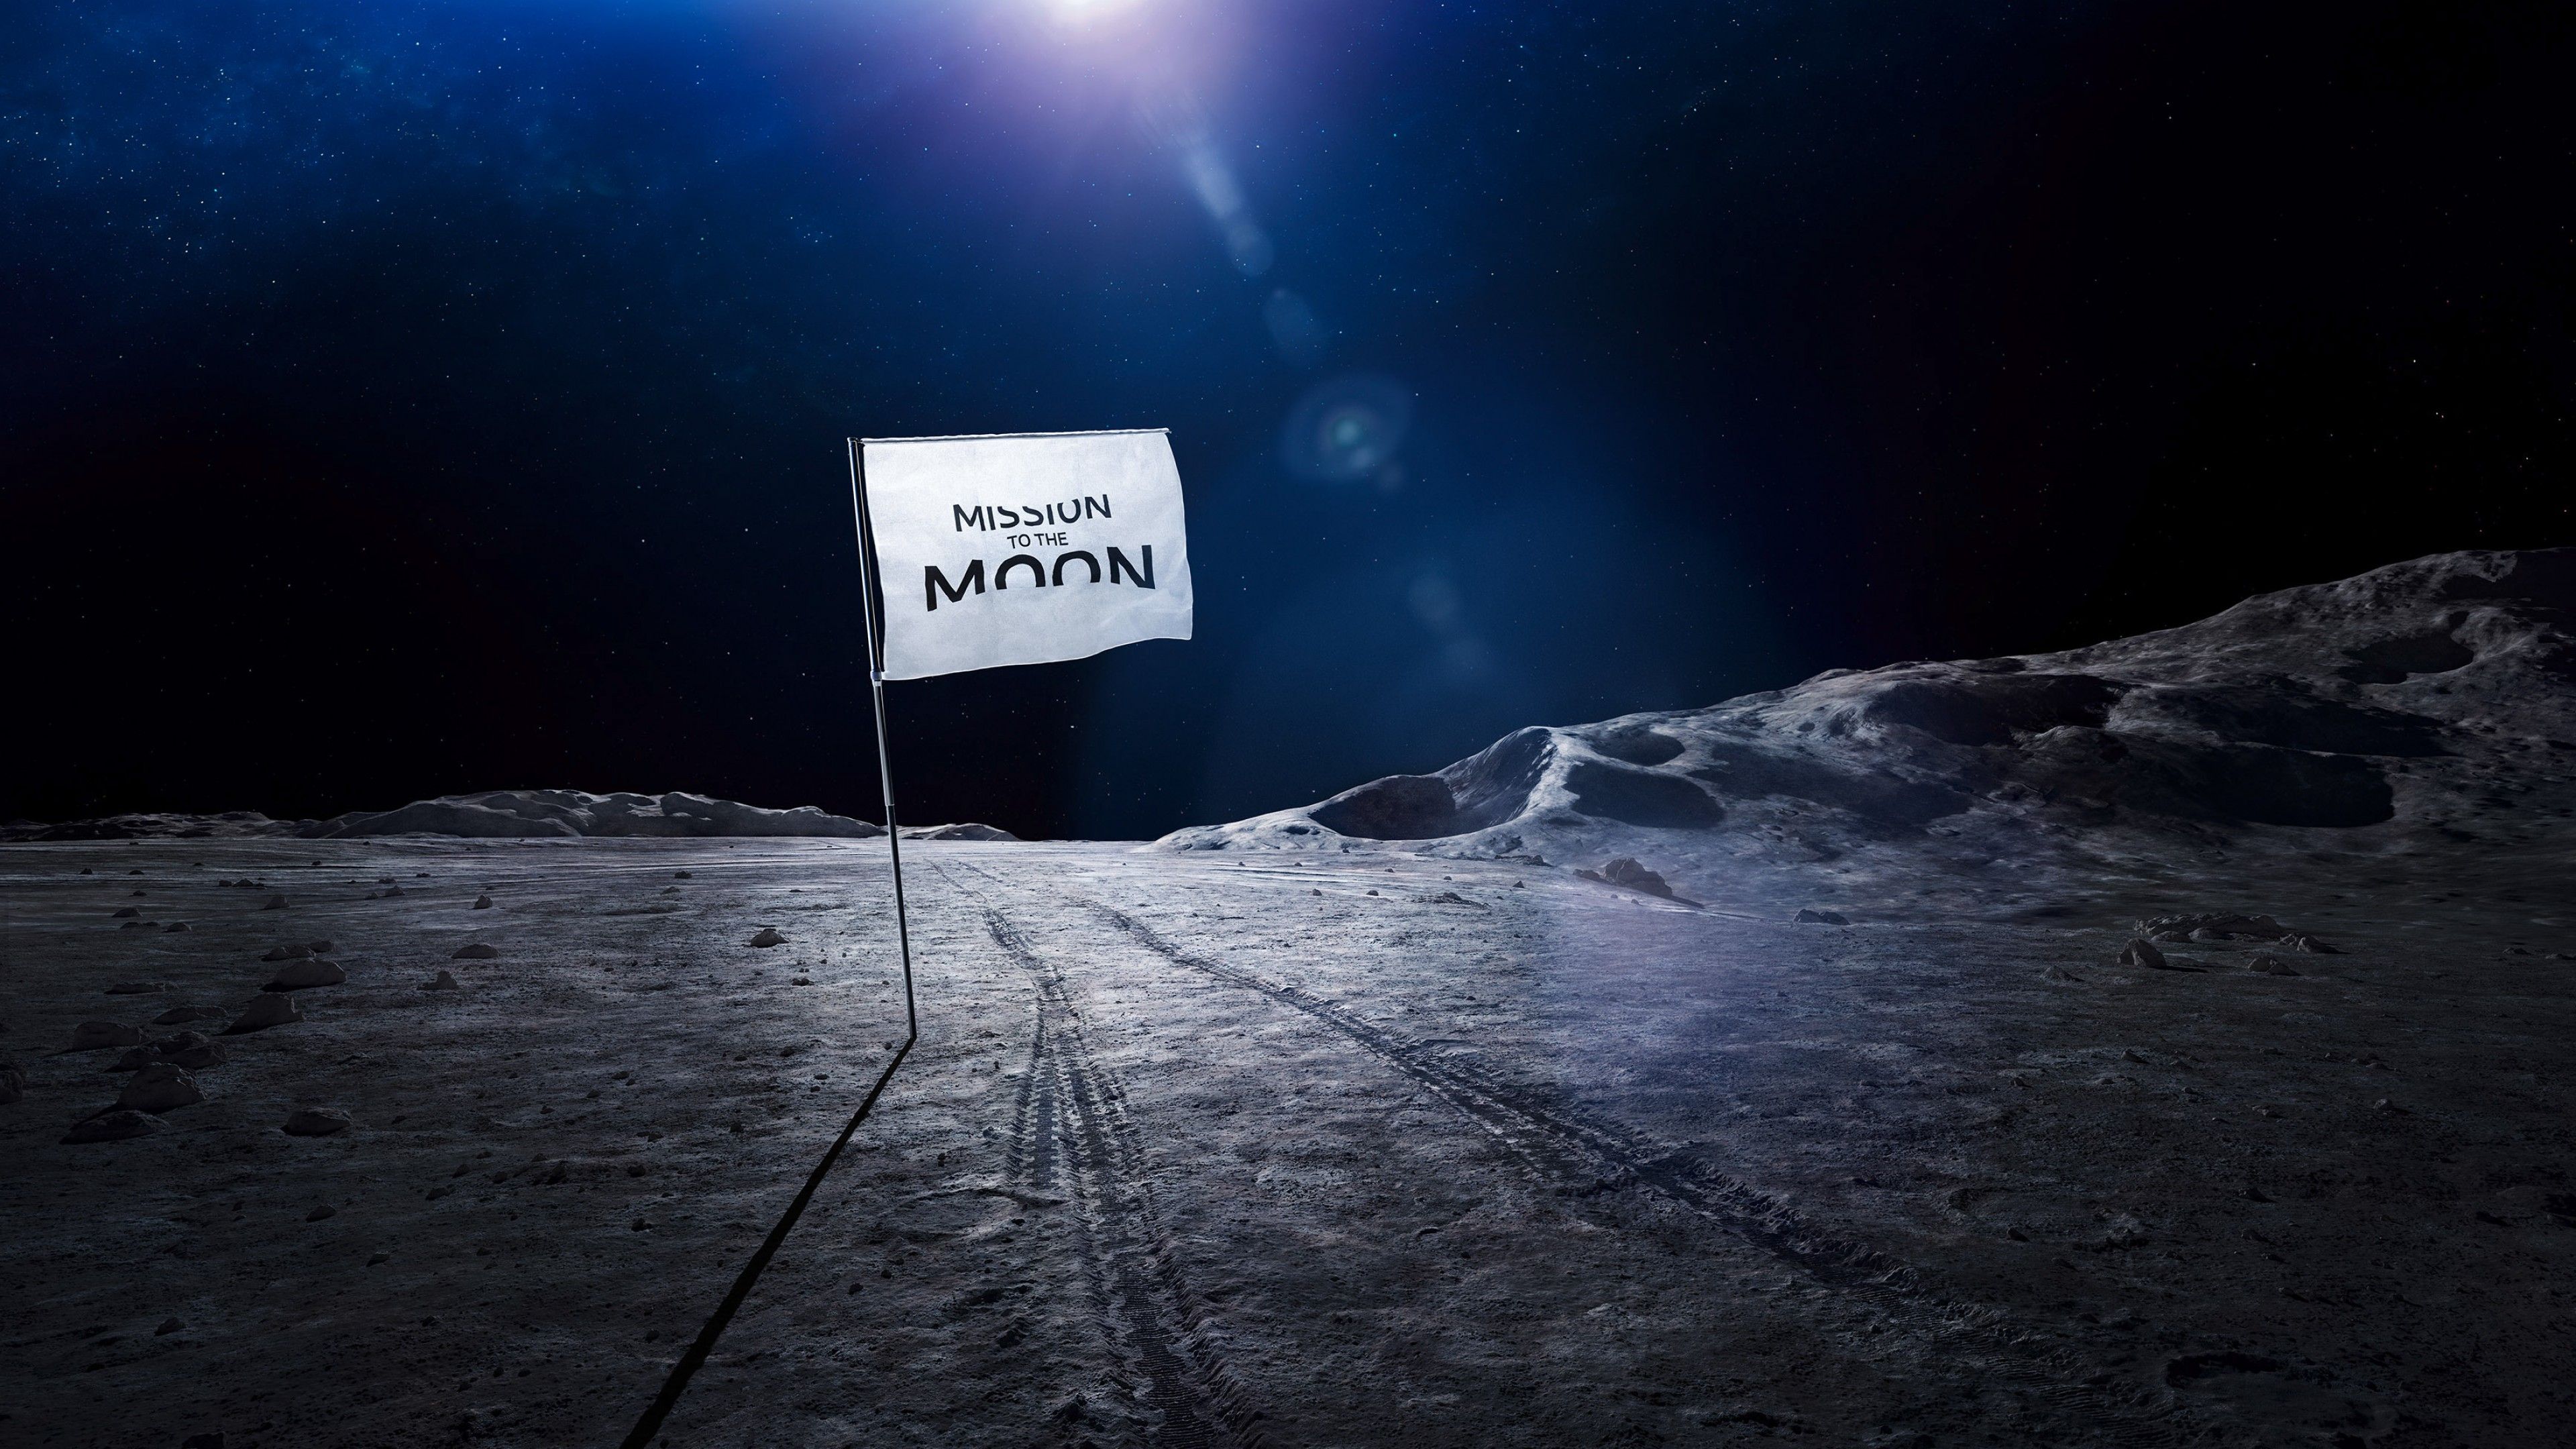 Wallpaper Mission to the Moon, Audi Moon landing project, HD, Space,. Wallpaper for iPhone, Android, Mobile and Desktop